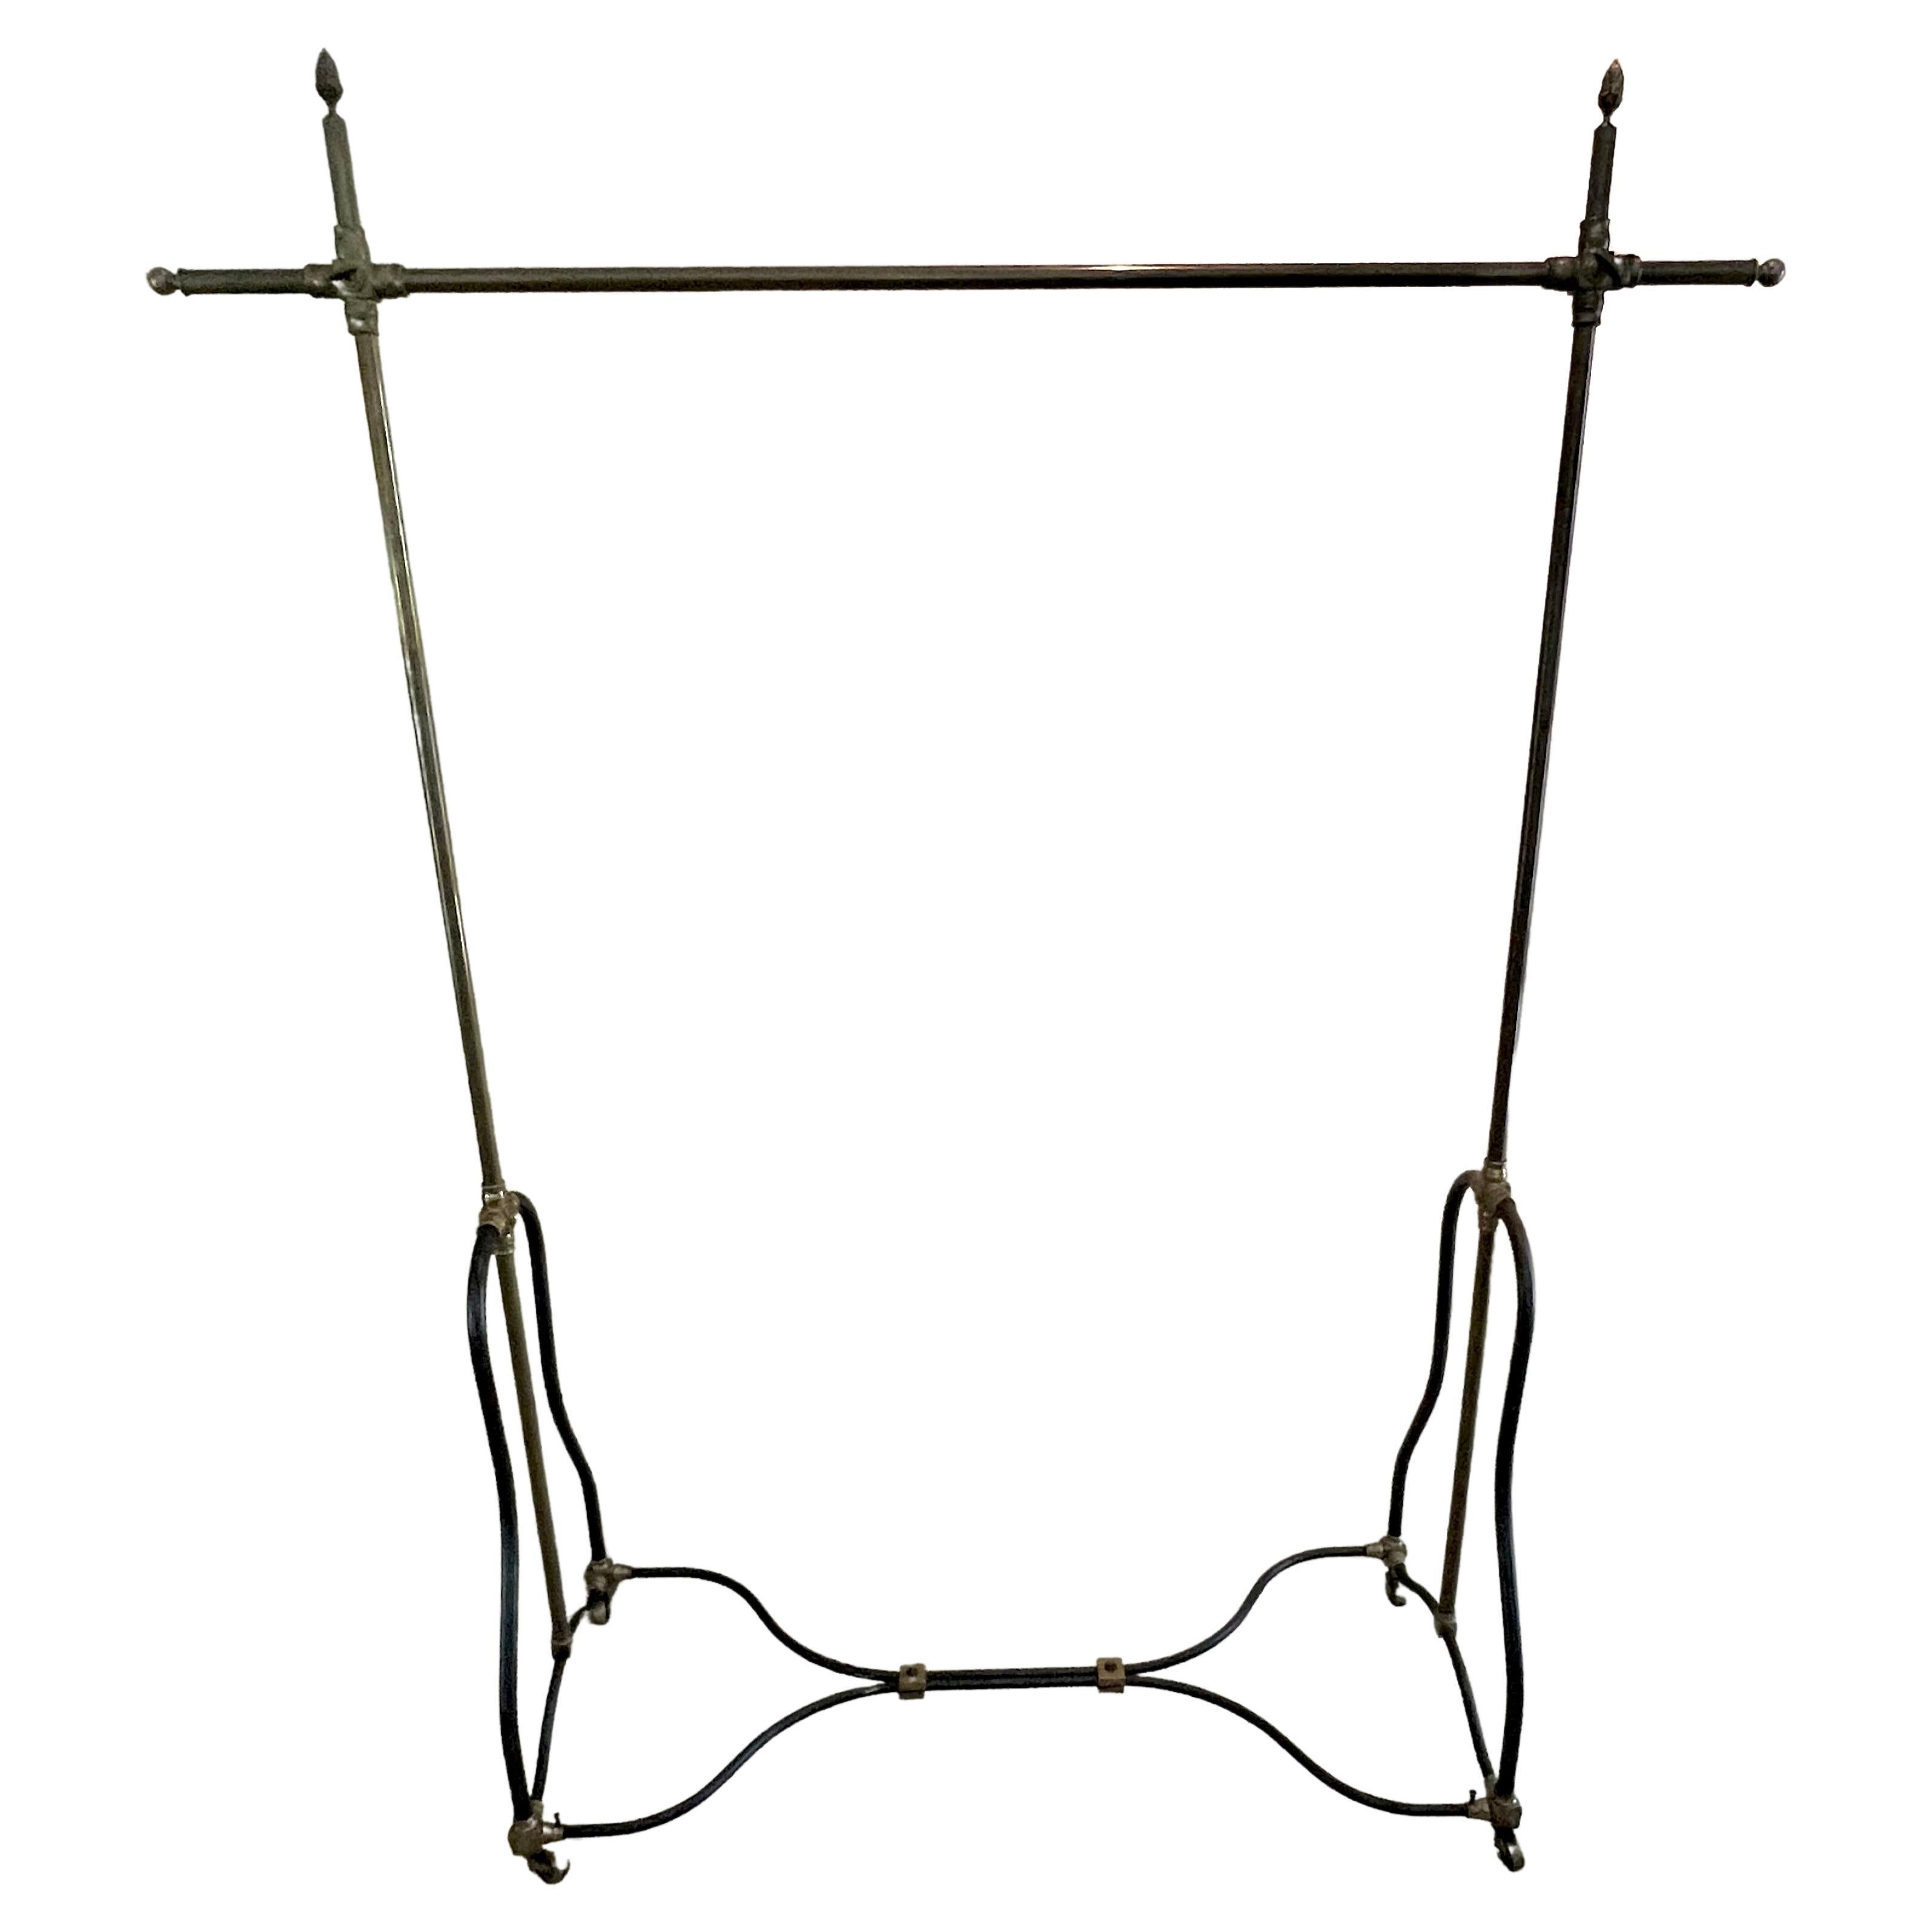 English Early 20th Century Brass and Iron Adjustable Wardrobe Rack or Stand